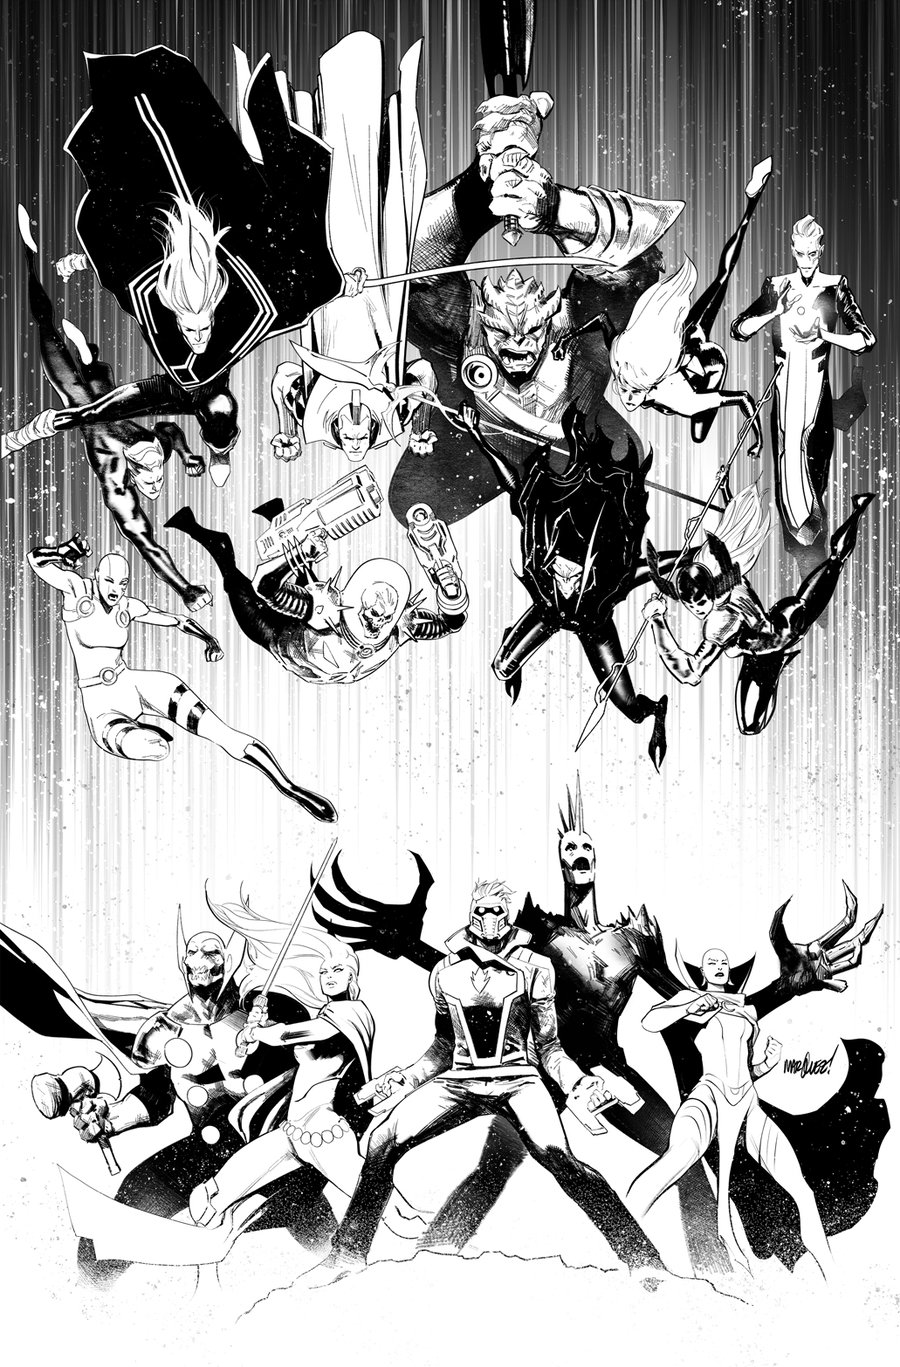 Image of GUARDIANS OF THE GALAXY #6 COVER ARTIST'S PROOF